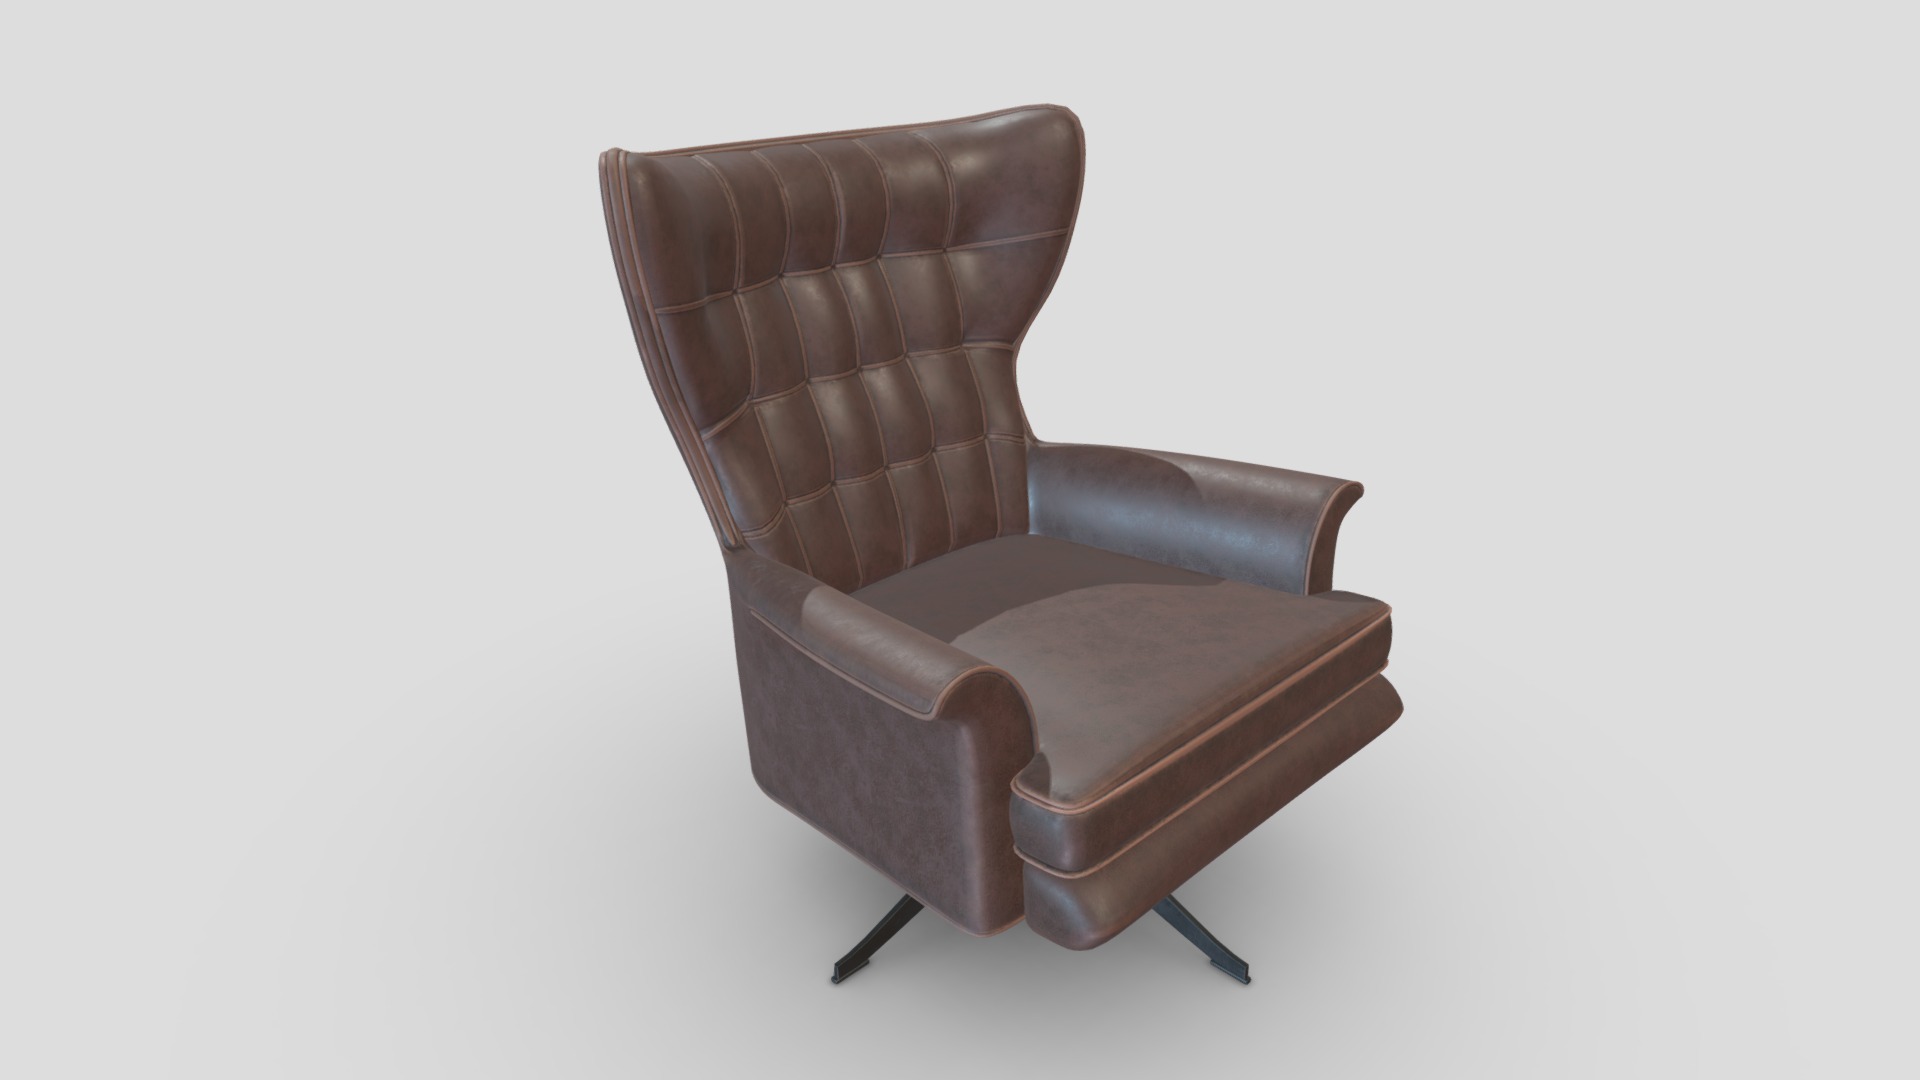 3D model Arm Chair 30 - This is a 3D model of the Arm Chair 30. The 3D model is about a brown chair with a cushion.